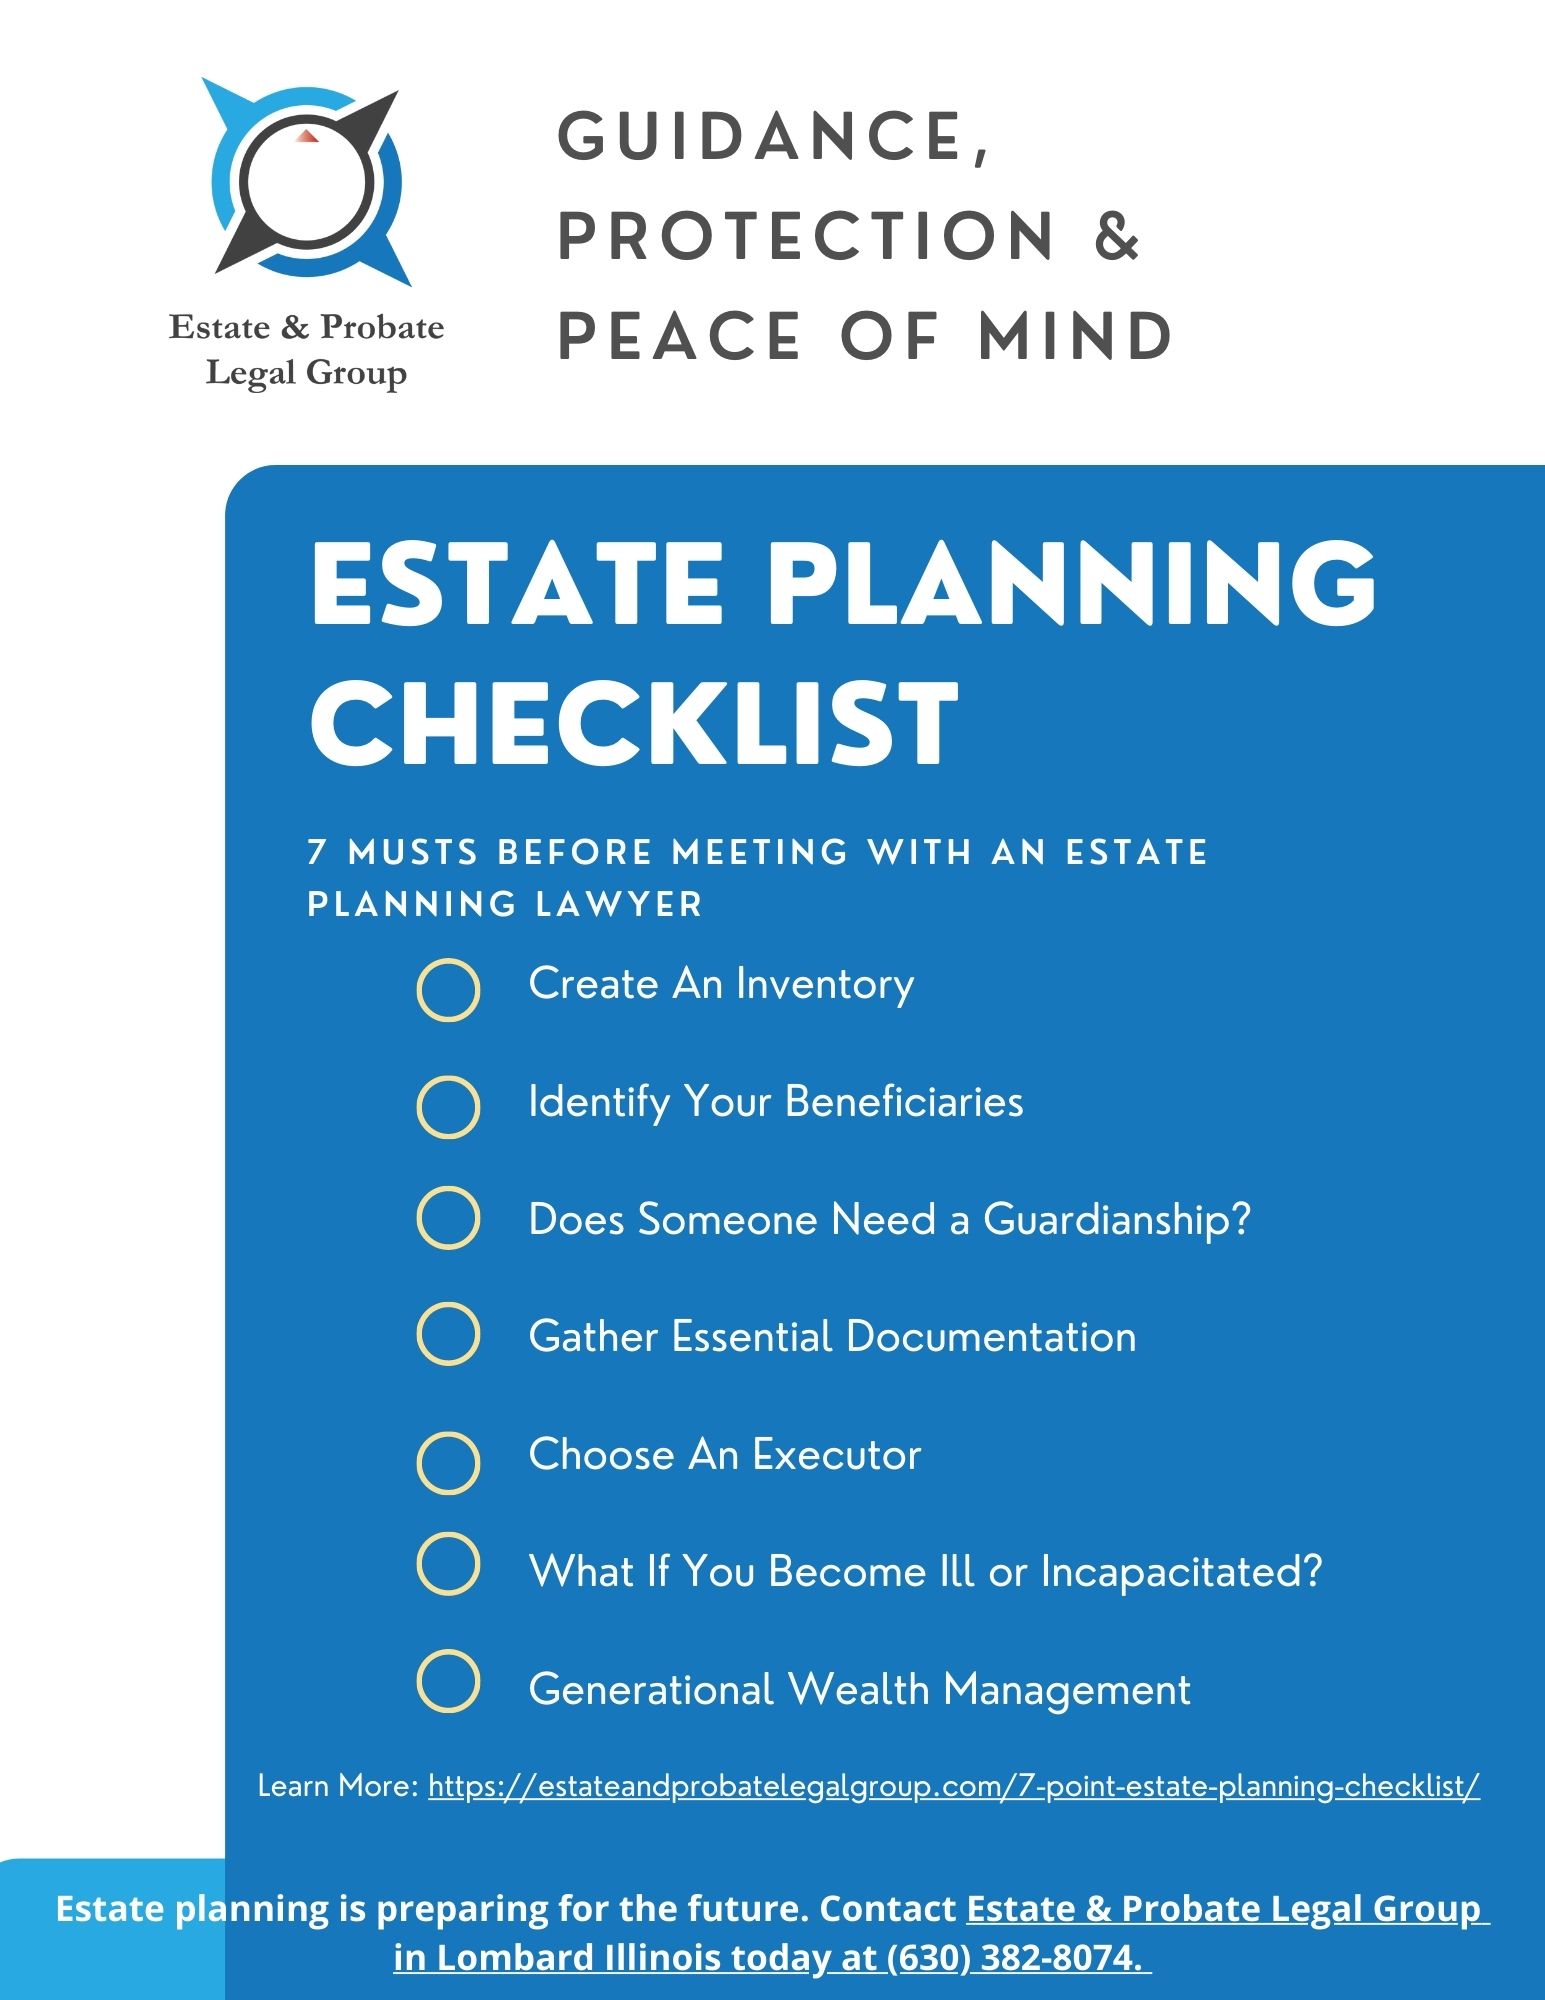 7-point-estate-planning-checklist-estate-and-probate-legal-group